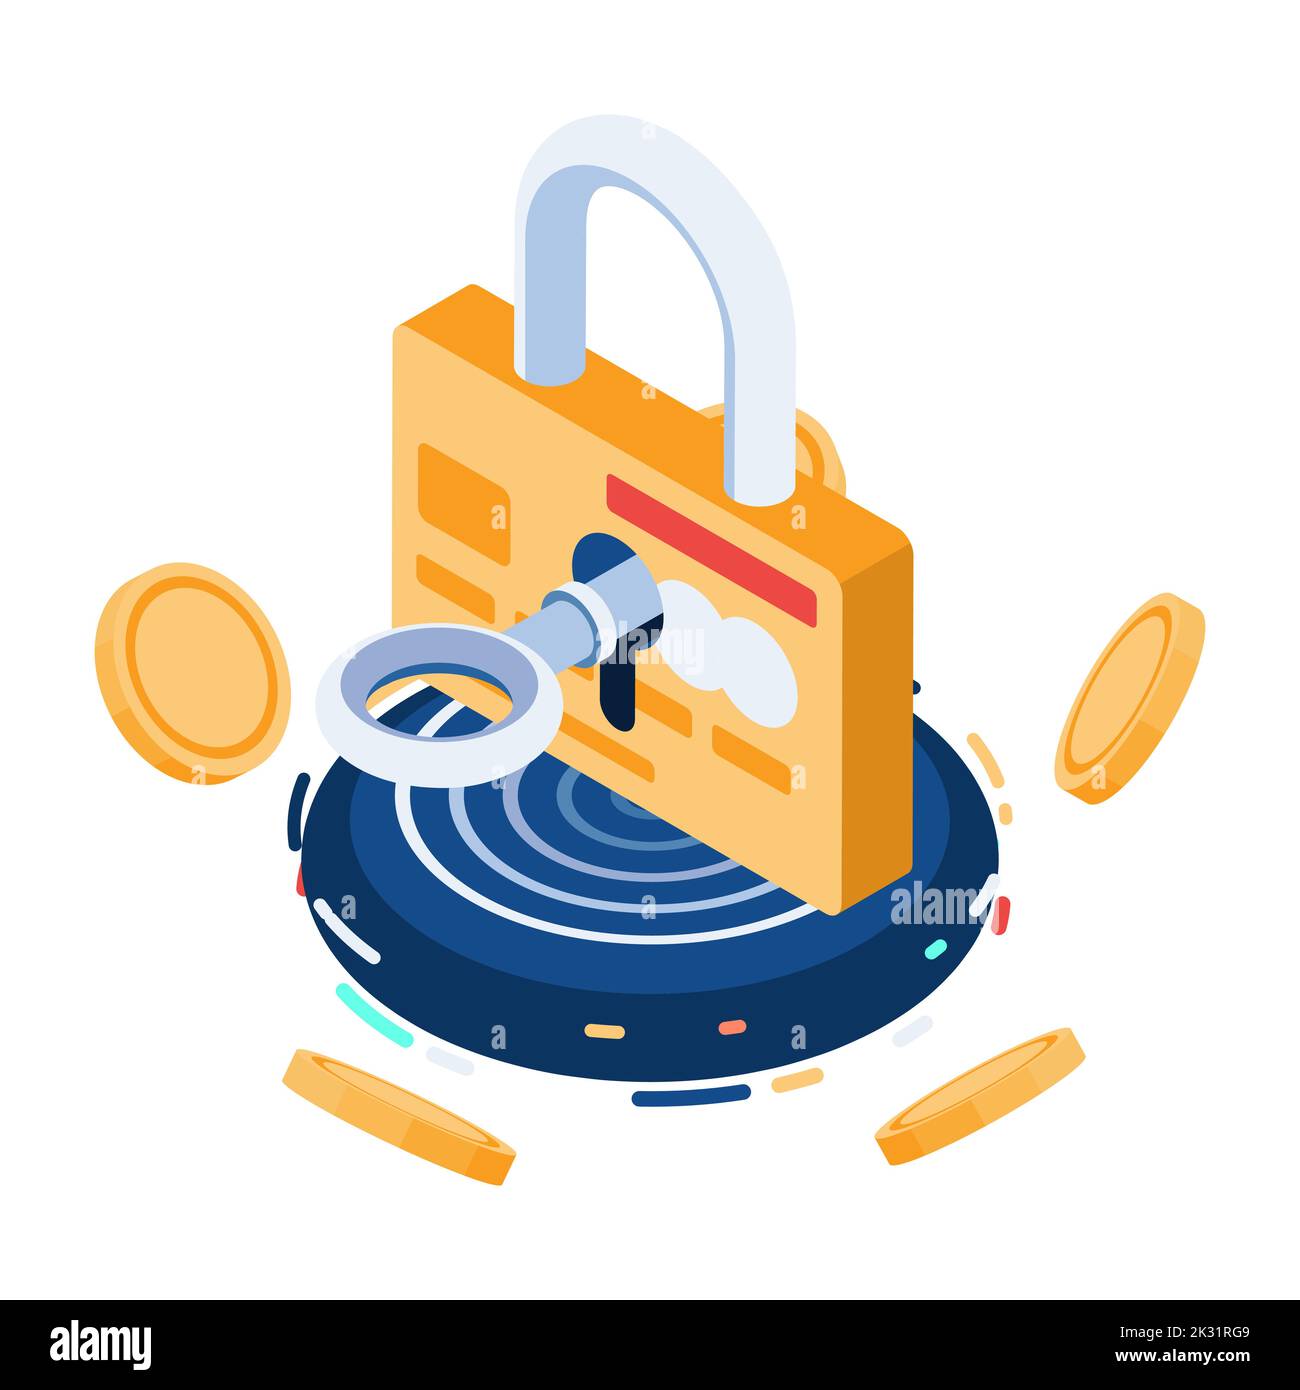 Flat 3d Isometric Credit Card Protected by Key and Lock. Financial Security Concept. Stock Vector